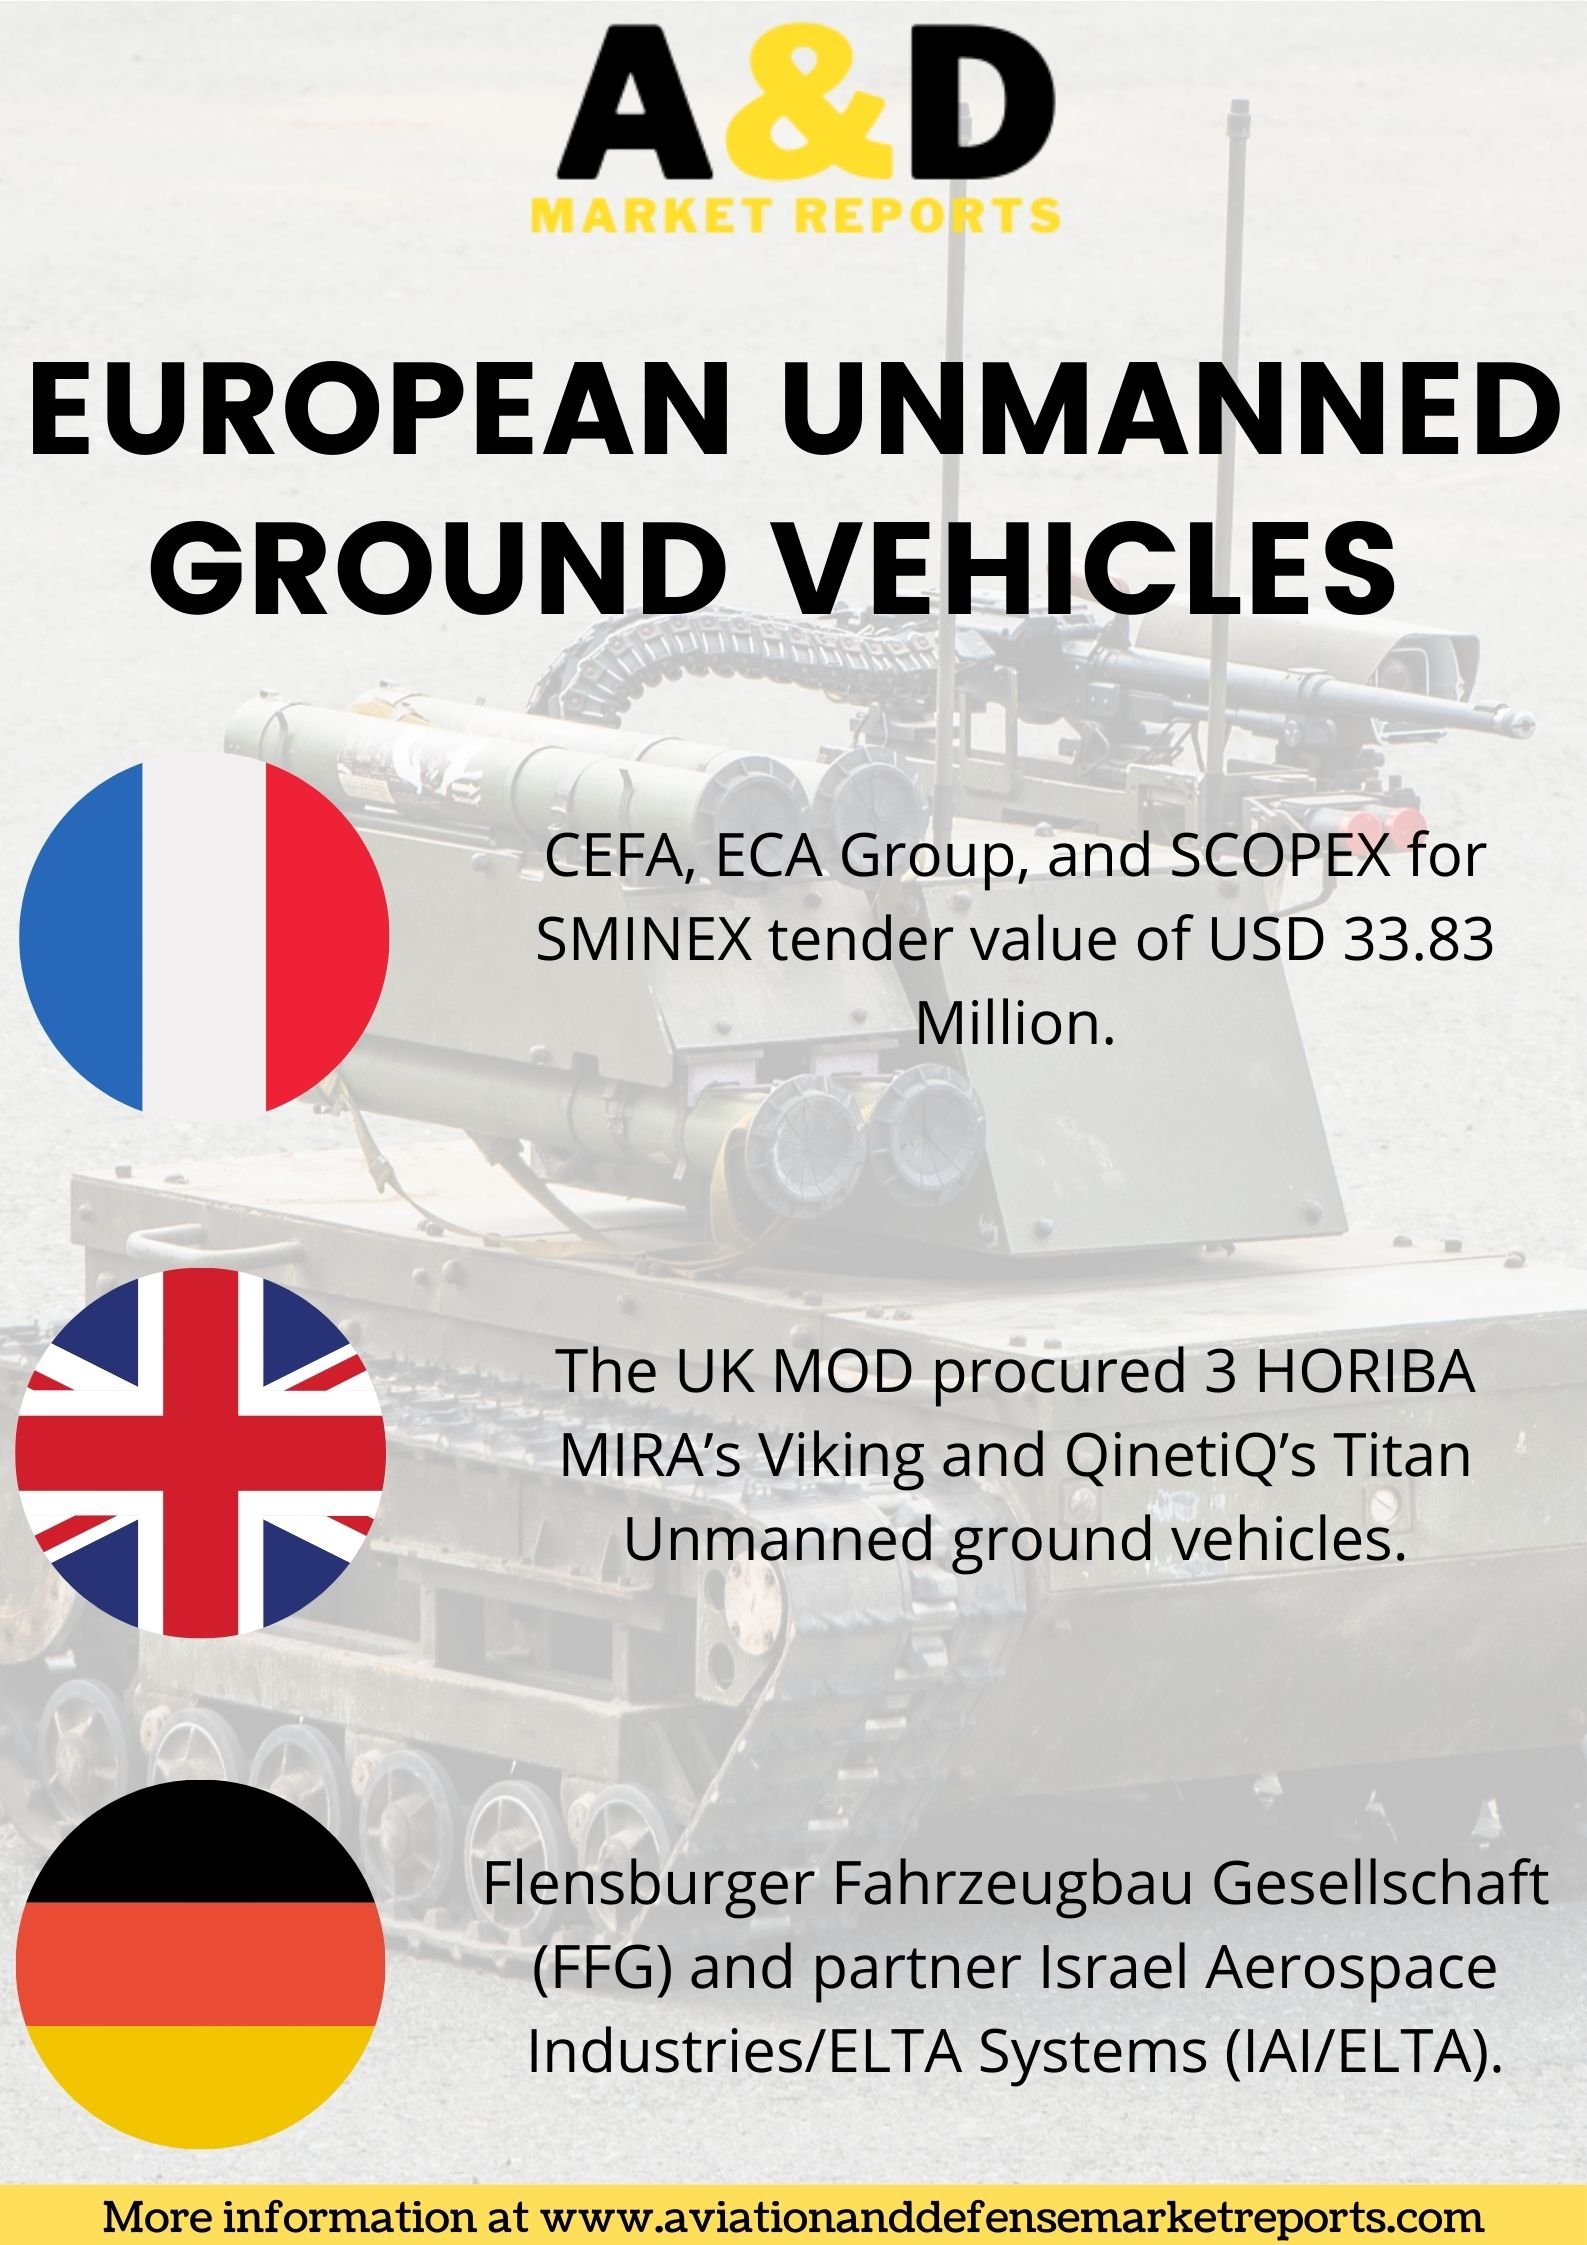 Top Trends In European Unmanned Ground Vehicles To Watch